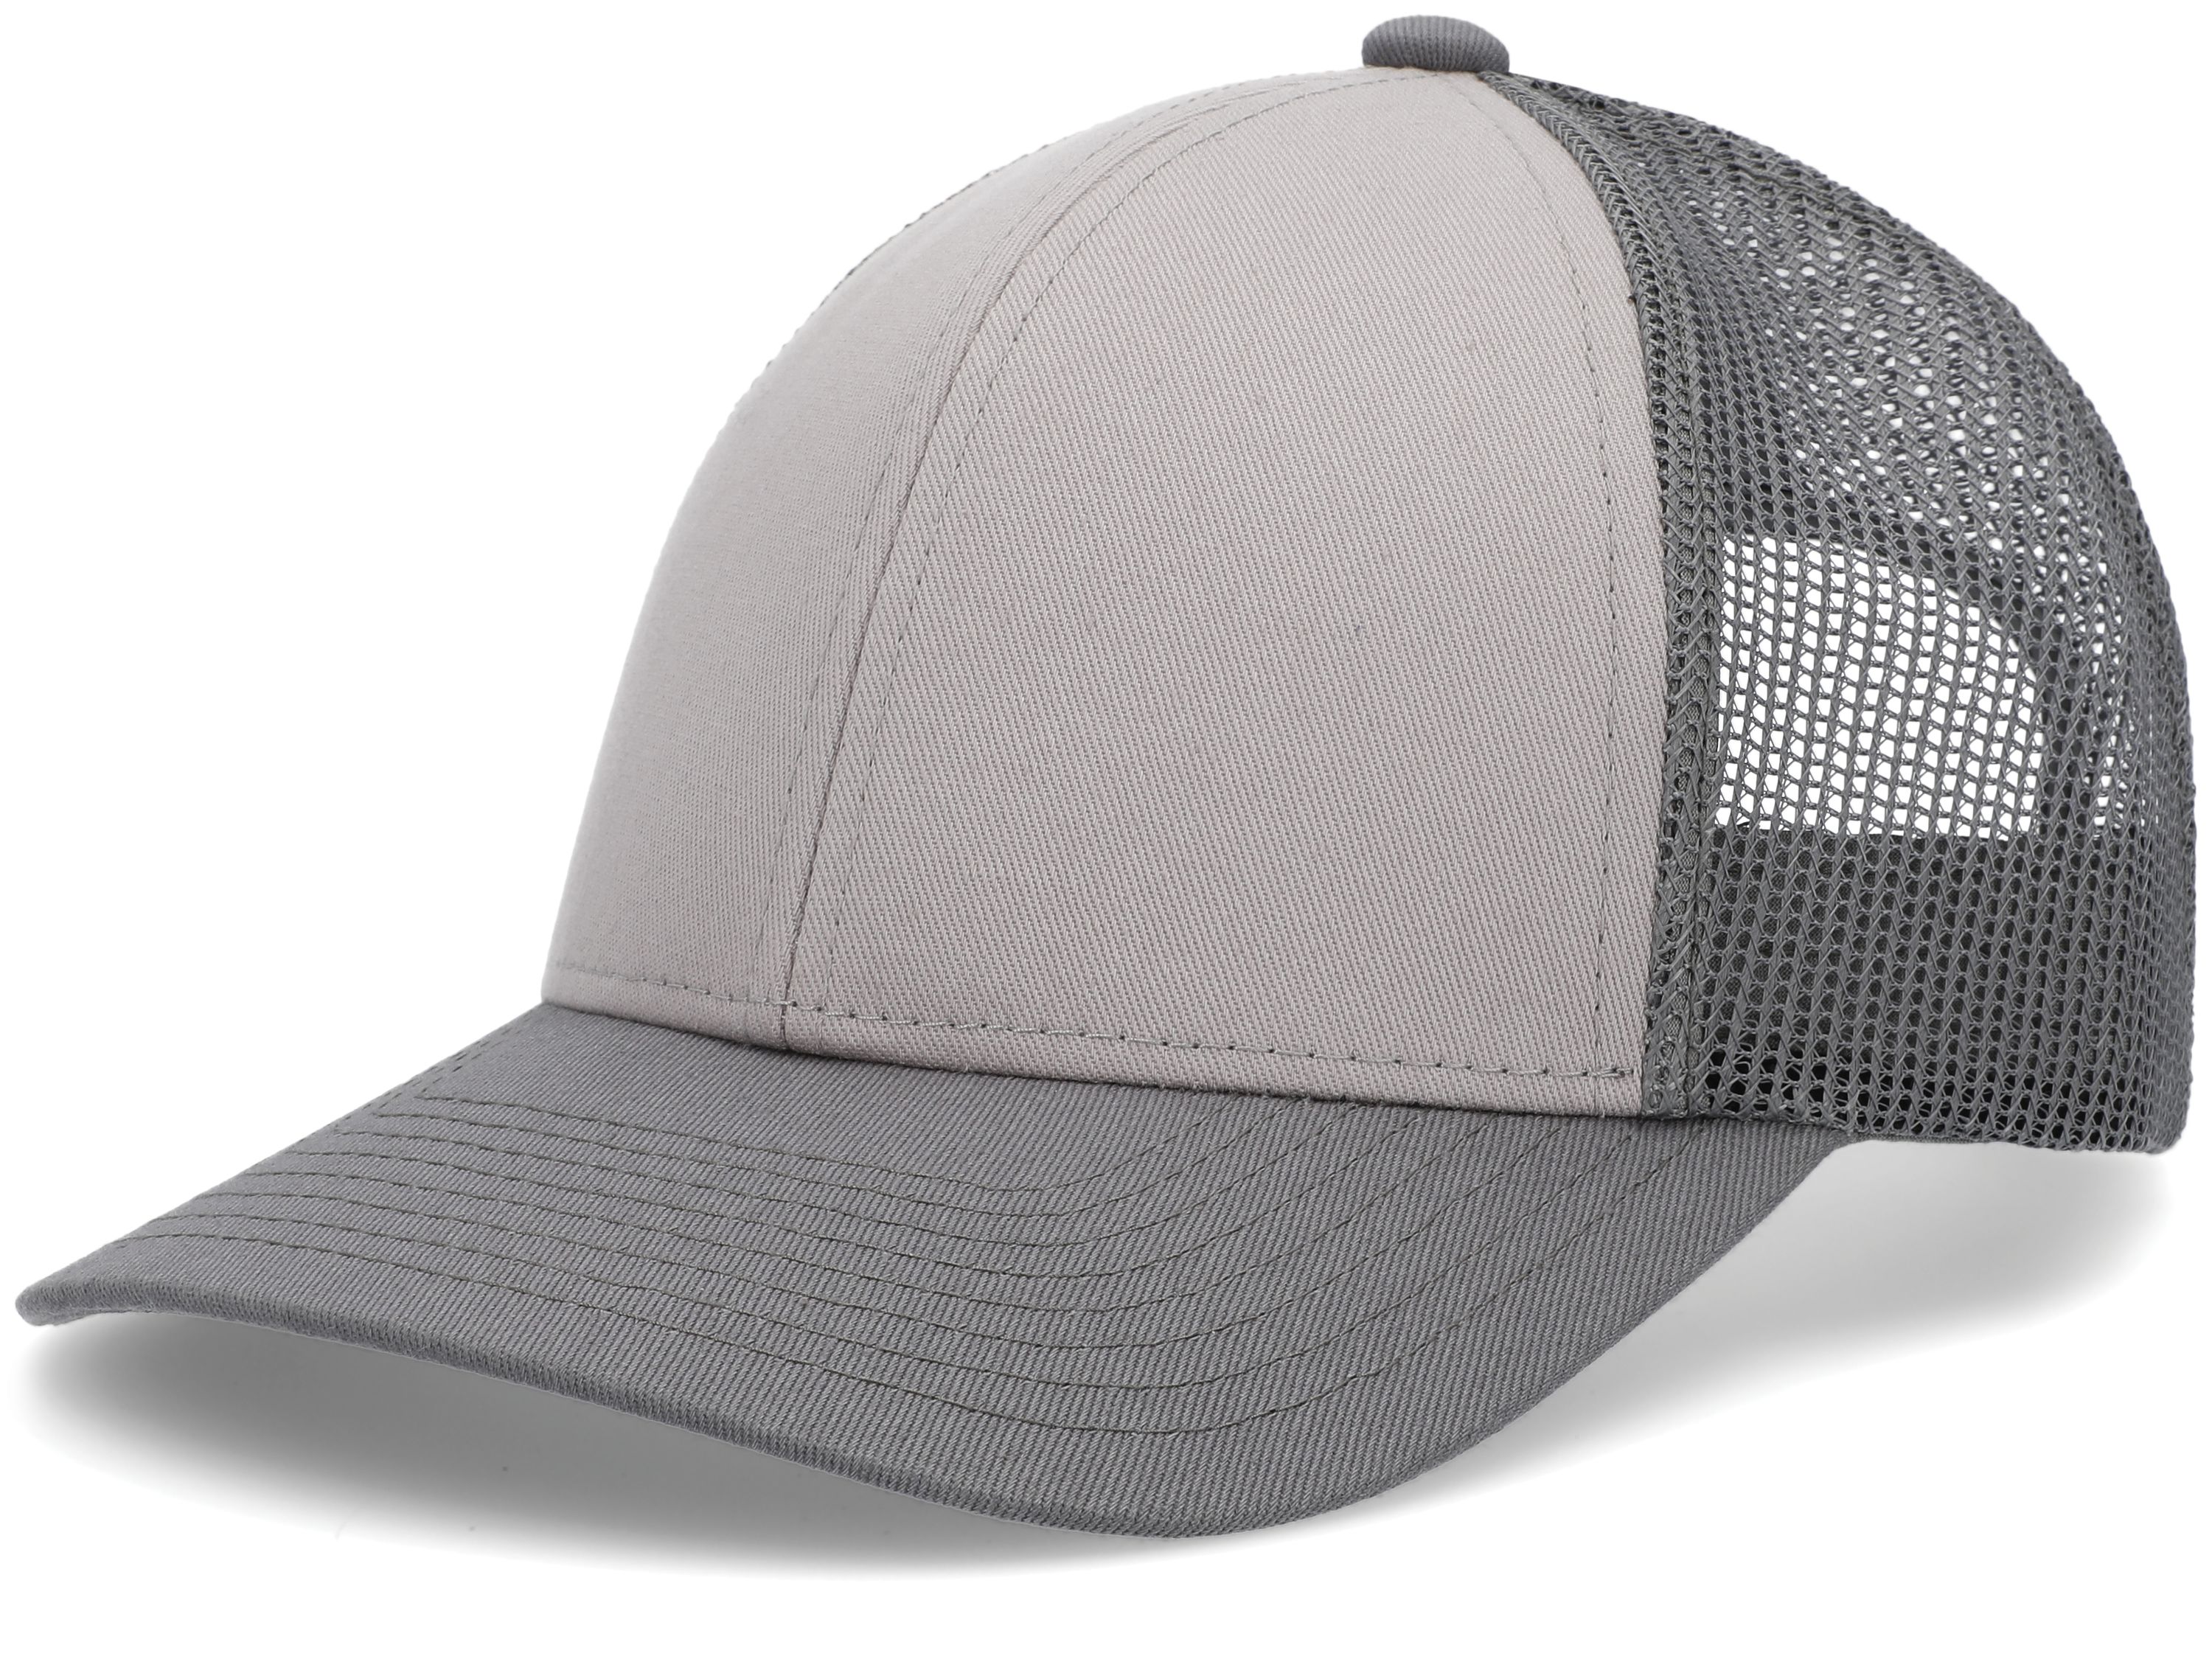 click to view Heather Grey/Lt Charcoal/Lt Charcoal